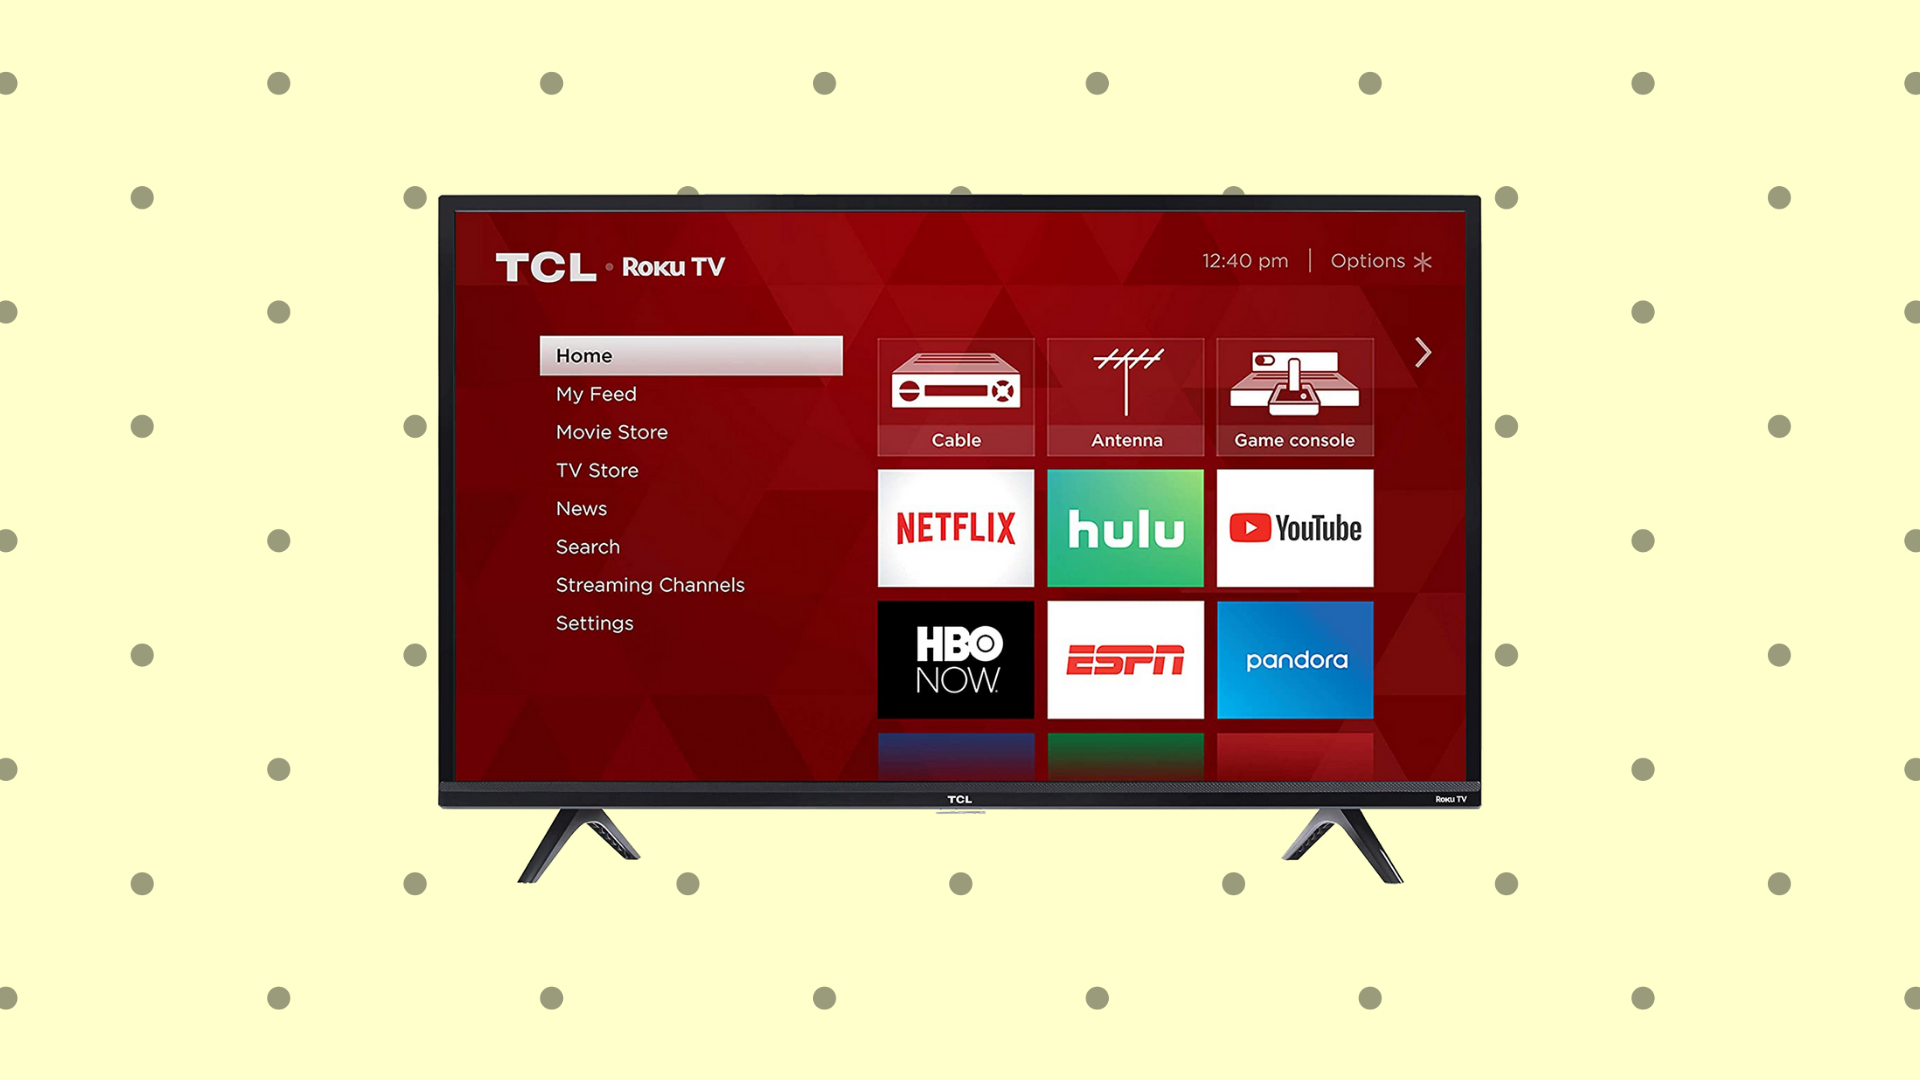 TCL 40-inch Class 3-Series HD Smart TV is on sale at Amazon